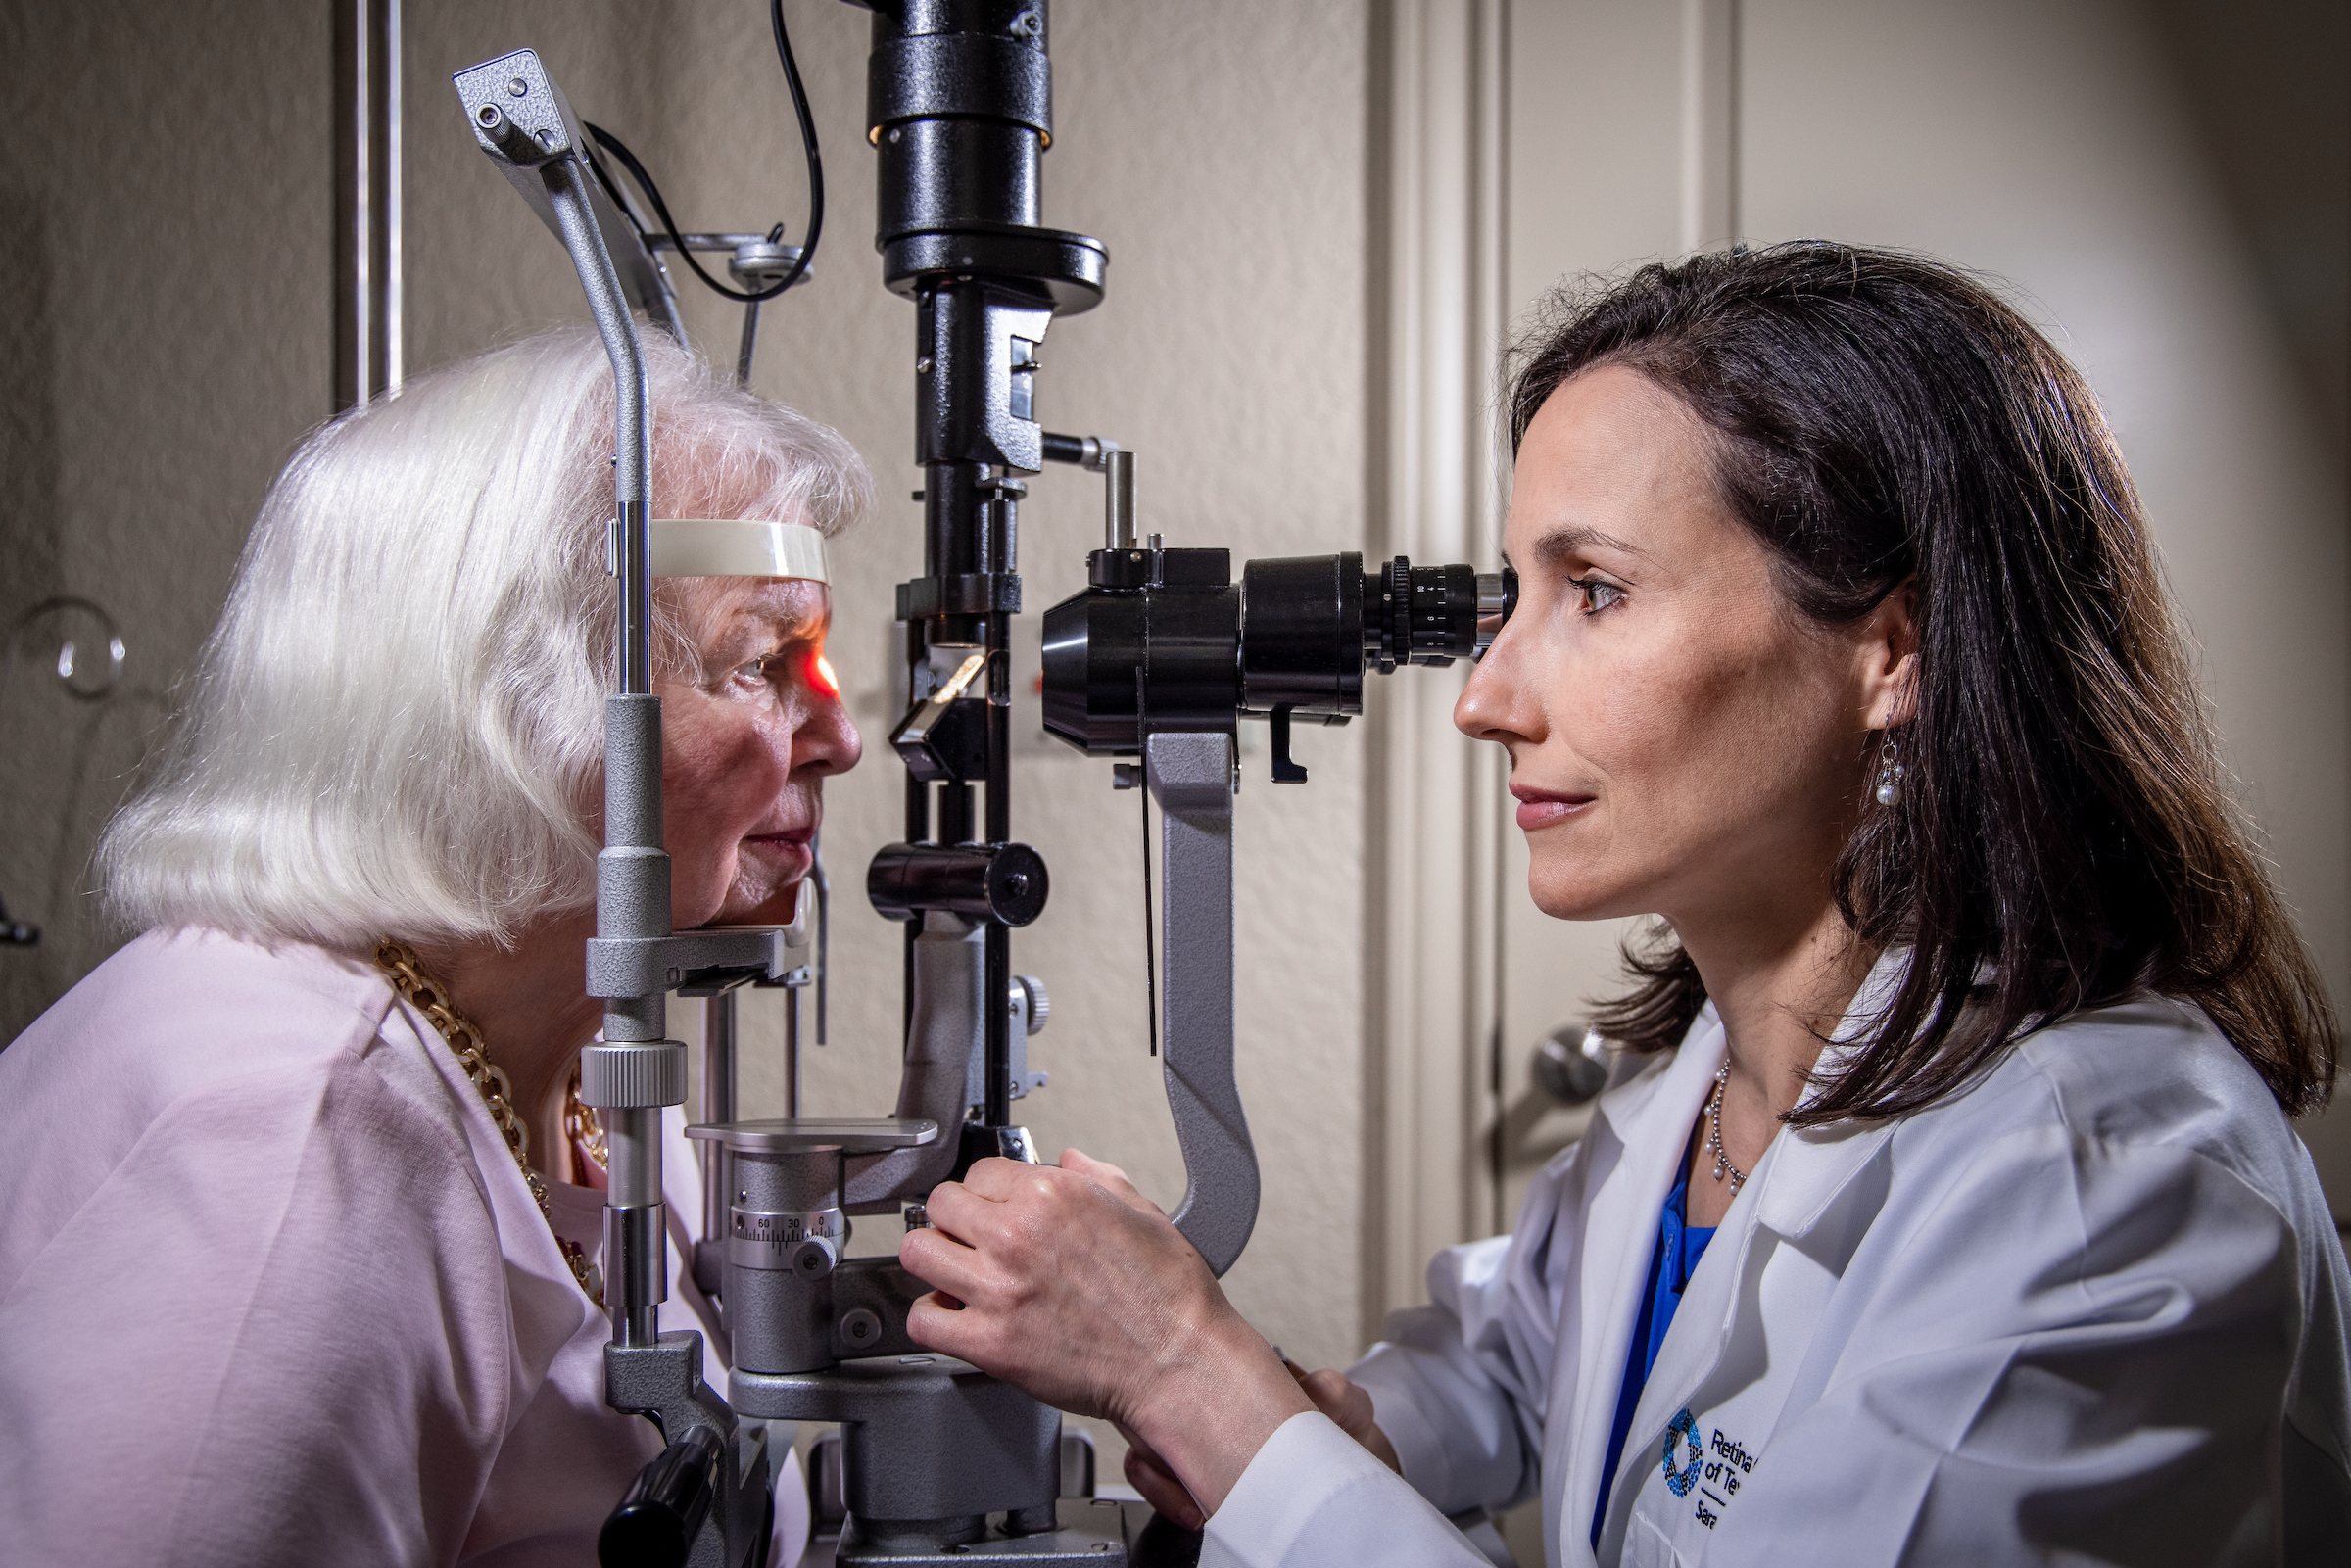 Choosing the Best Eye Care: Retina Specialist vs Ophthalmologist